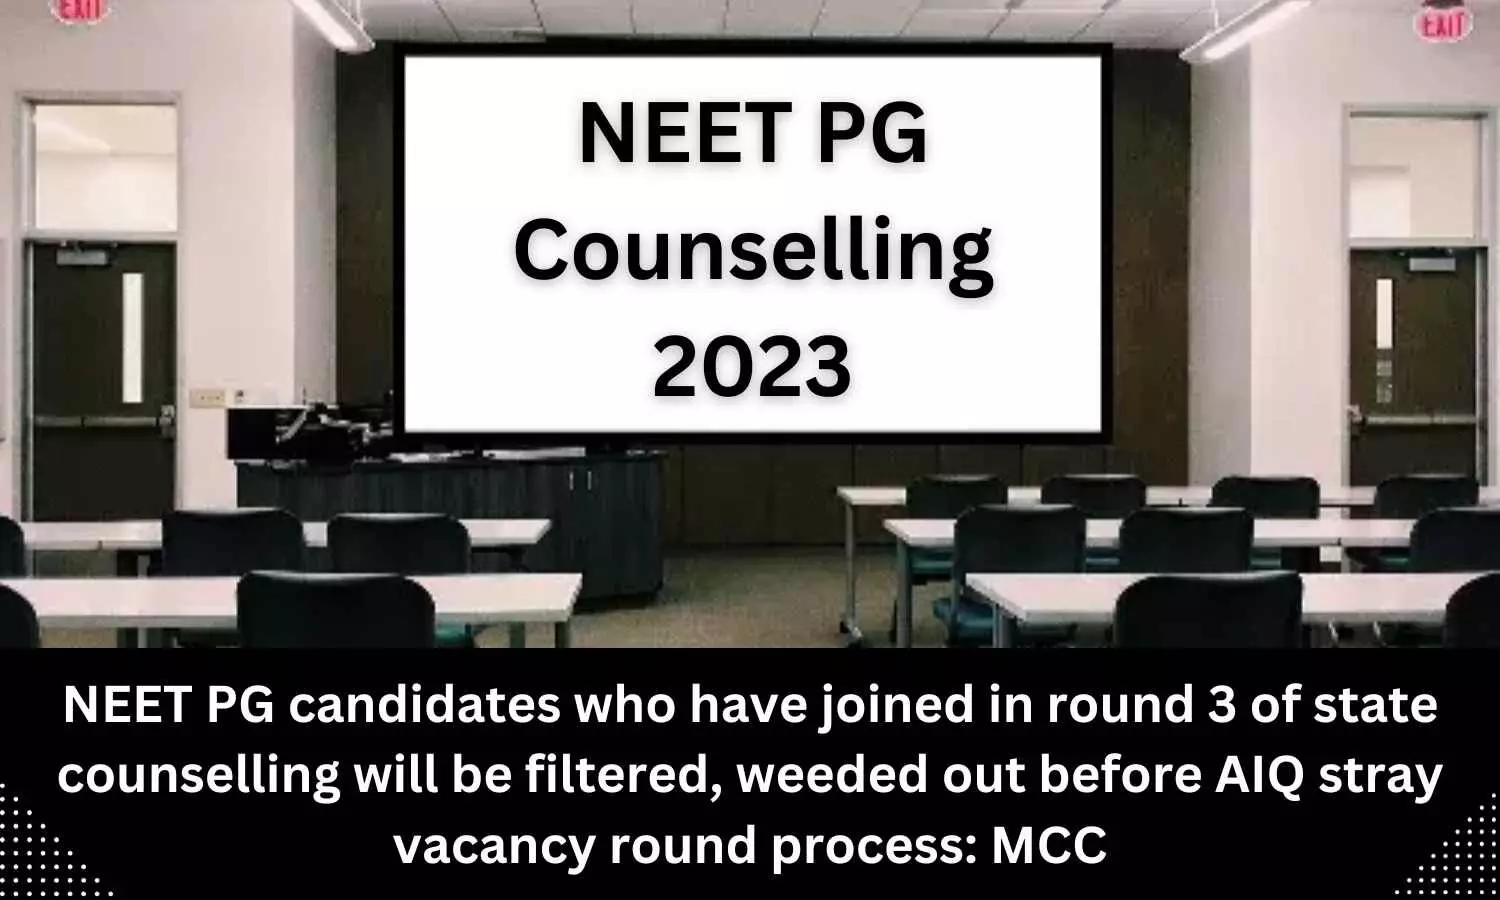 NEET PG candidates who have joined in round 3 of state counselling will be filtered, weeded out before AIQ stray vacancy round process: MCC